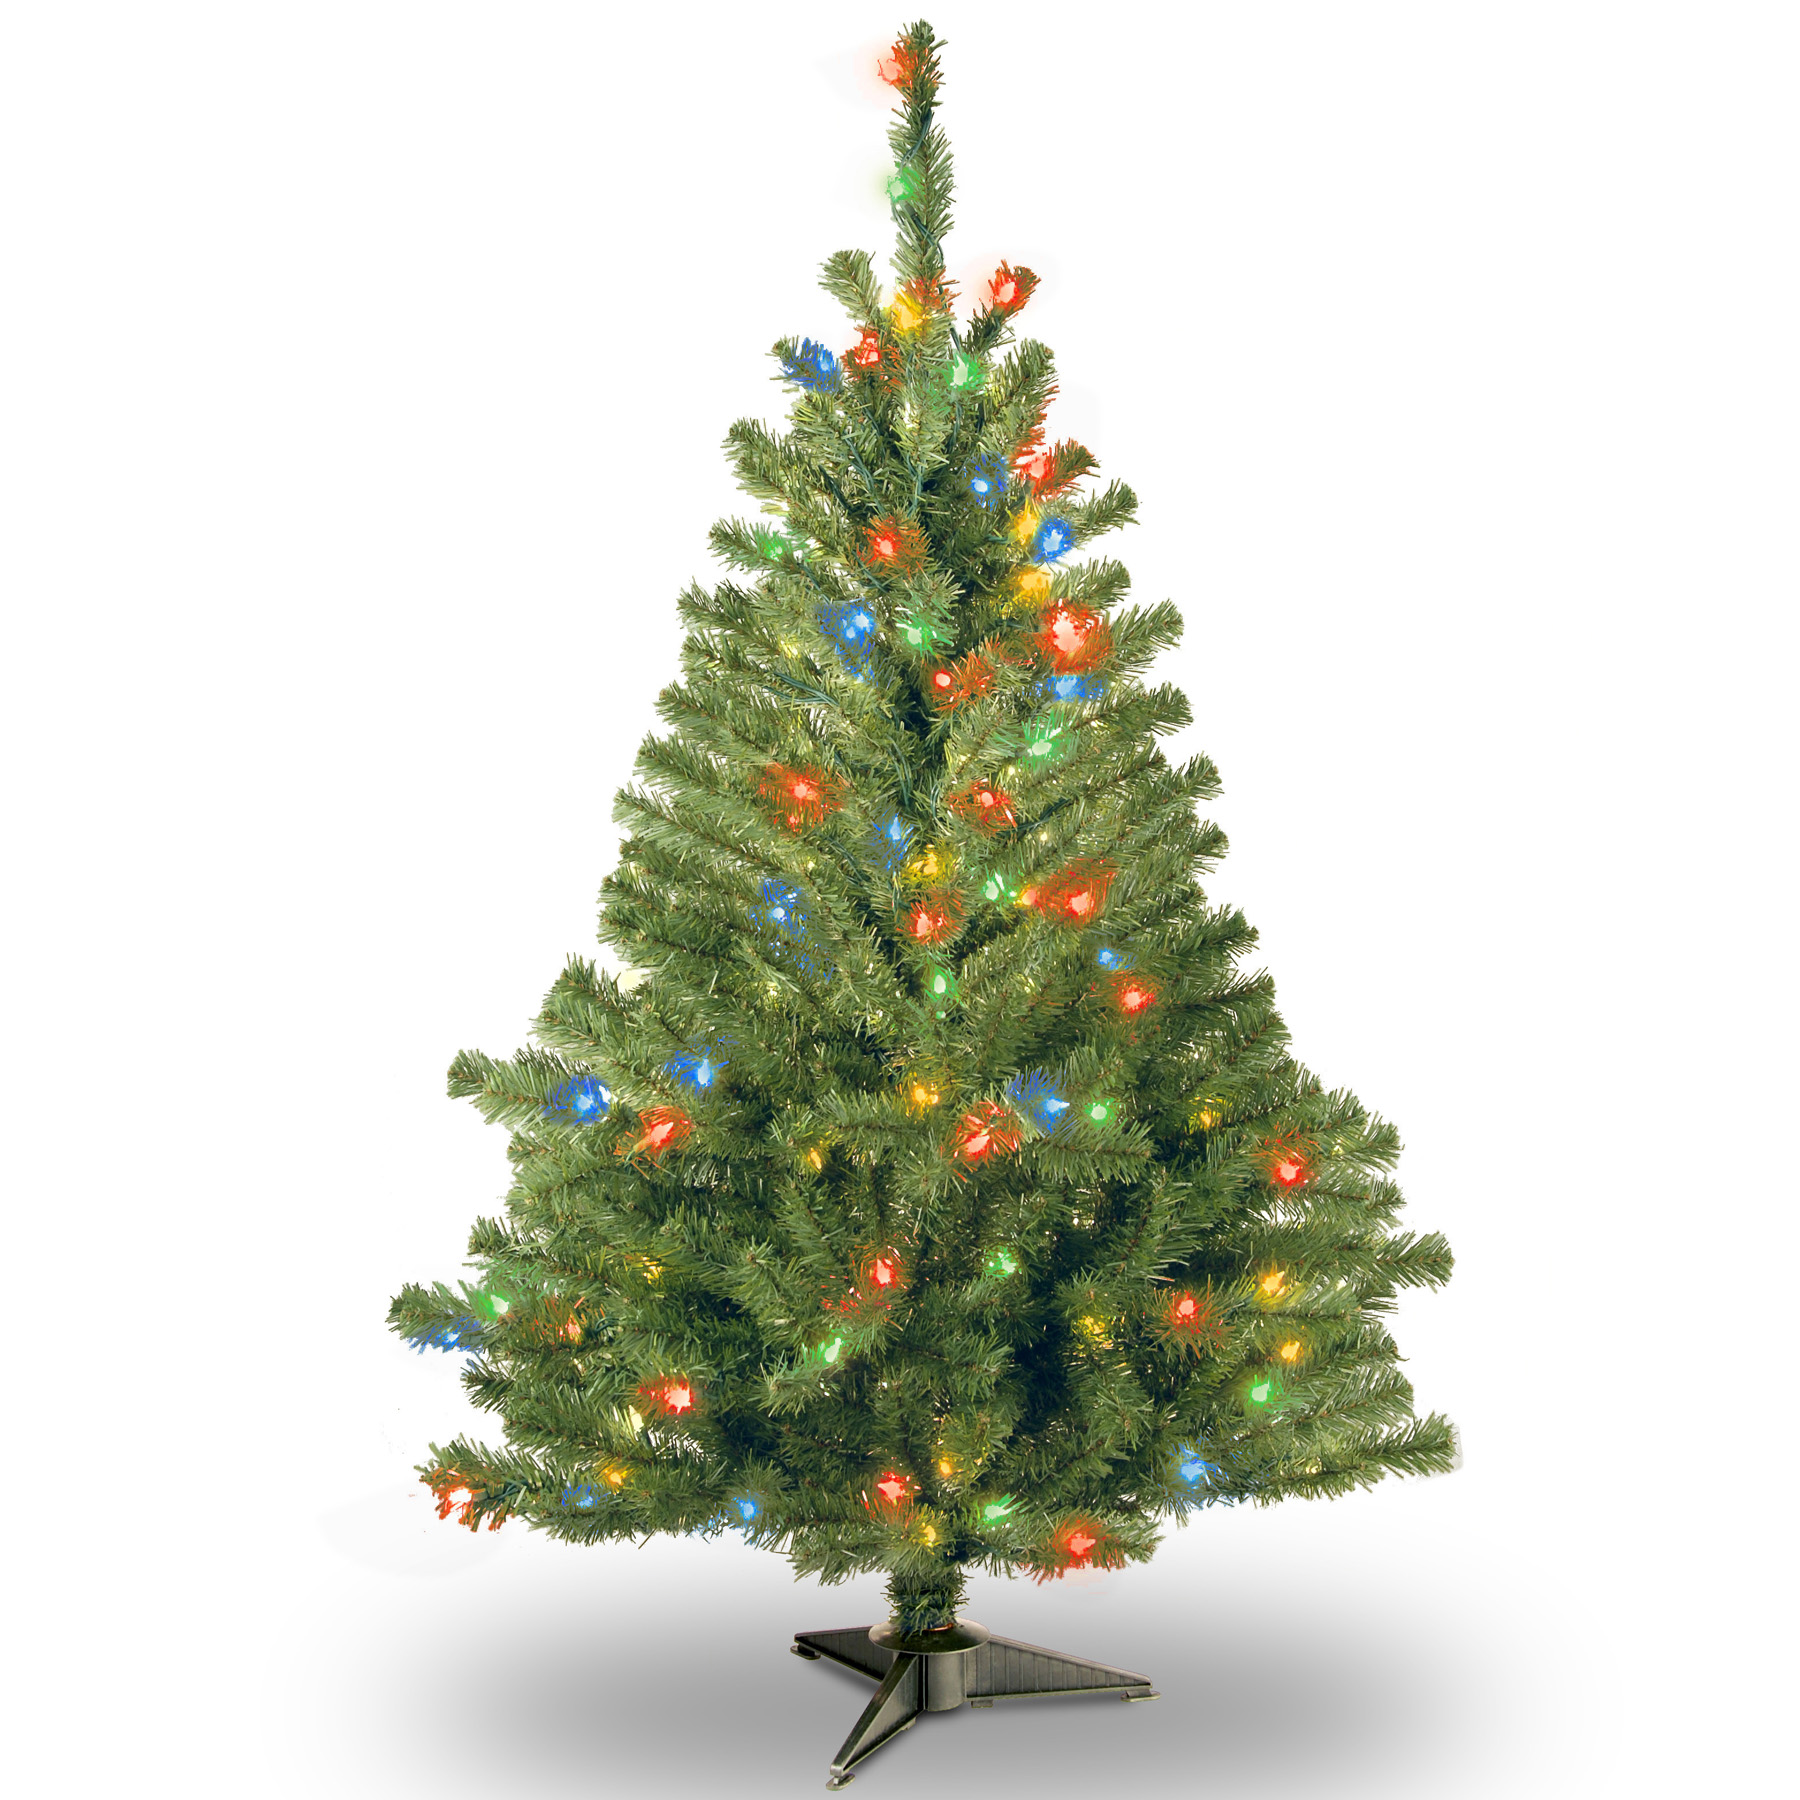 National Tree Company 4 ft. Kincaid Spruce Tree with Multicolor Lights